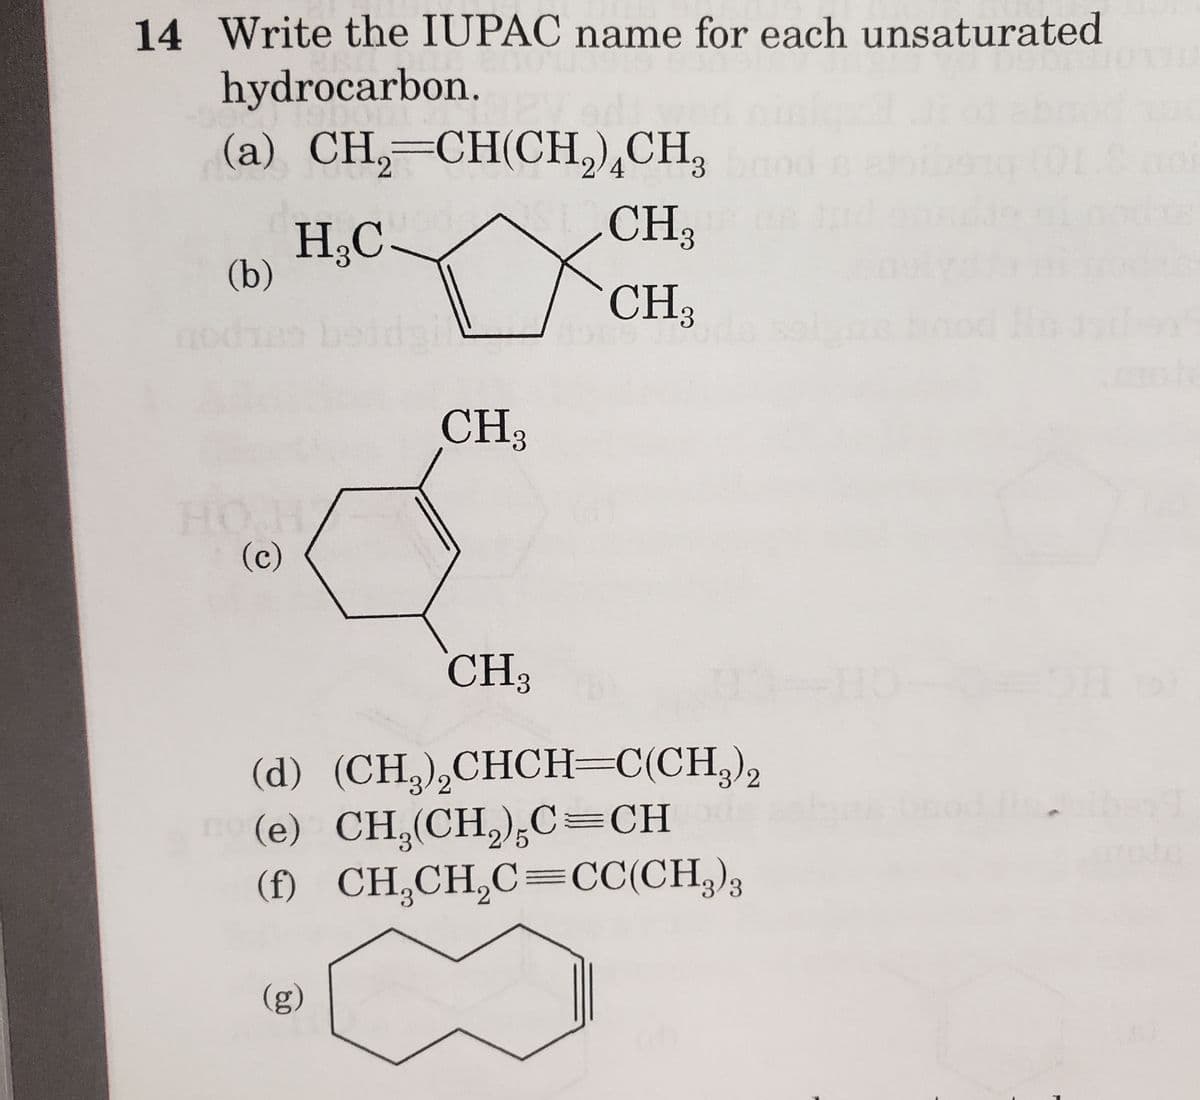 14 Write the IUPAC name for each unsaturated
hydrocarbon.
(a) CH,=CH(CH,) CH,
4
CH3
CH3
(b)
HO
(c)
H₂C
CH3
CH3
(d) (CH₂)₂CHCH=C(CH3)2
(e) CH₂(CH₂)5C=CH
(f) CH₂CH₂C=CC(CH3)3
(g)